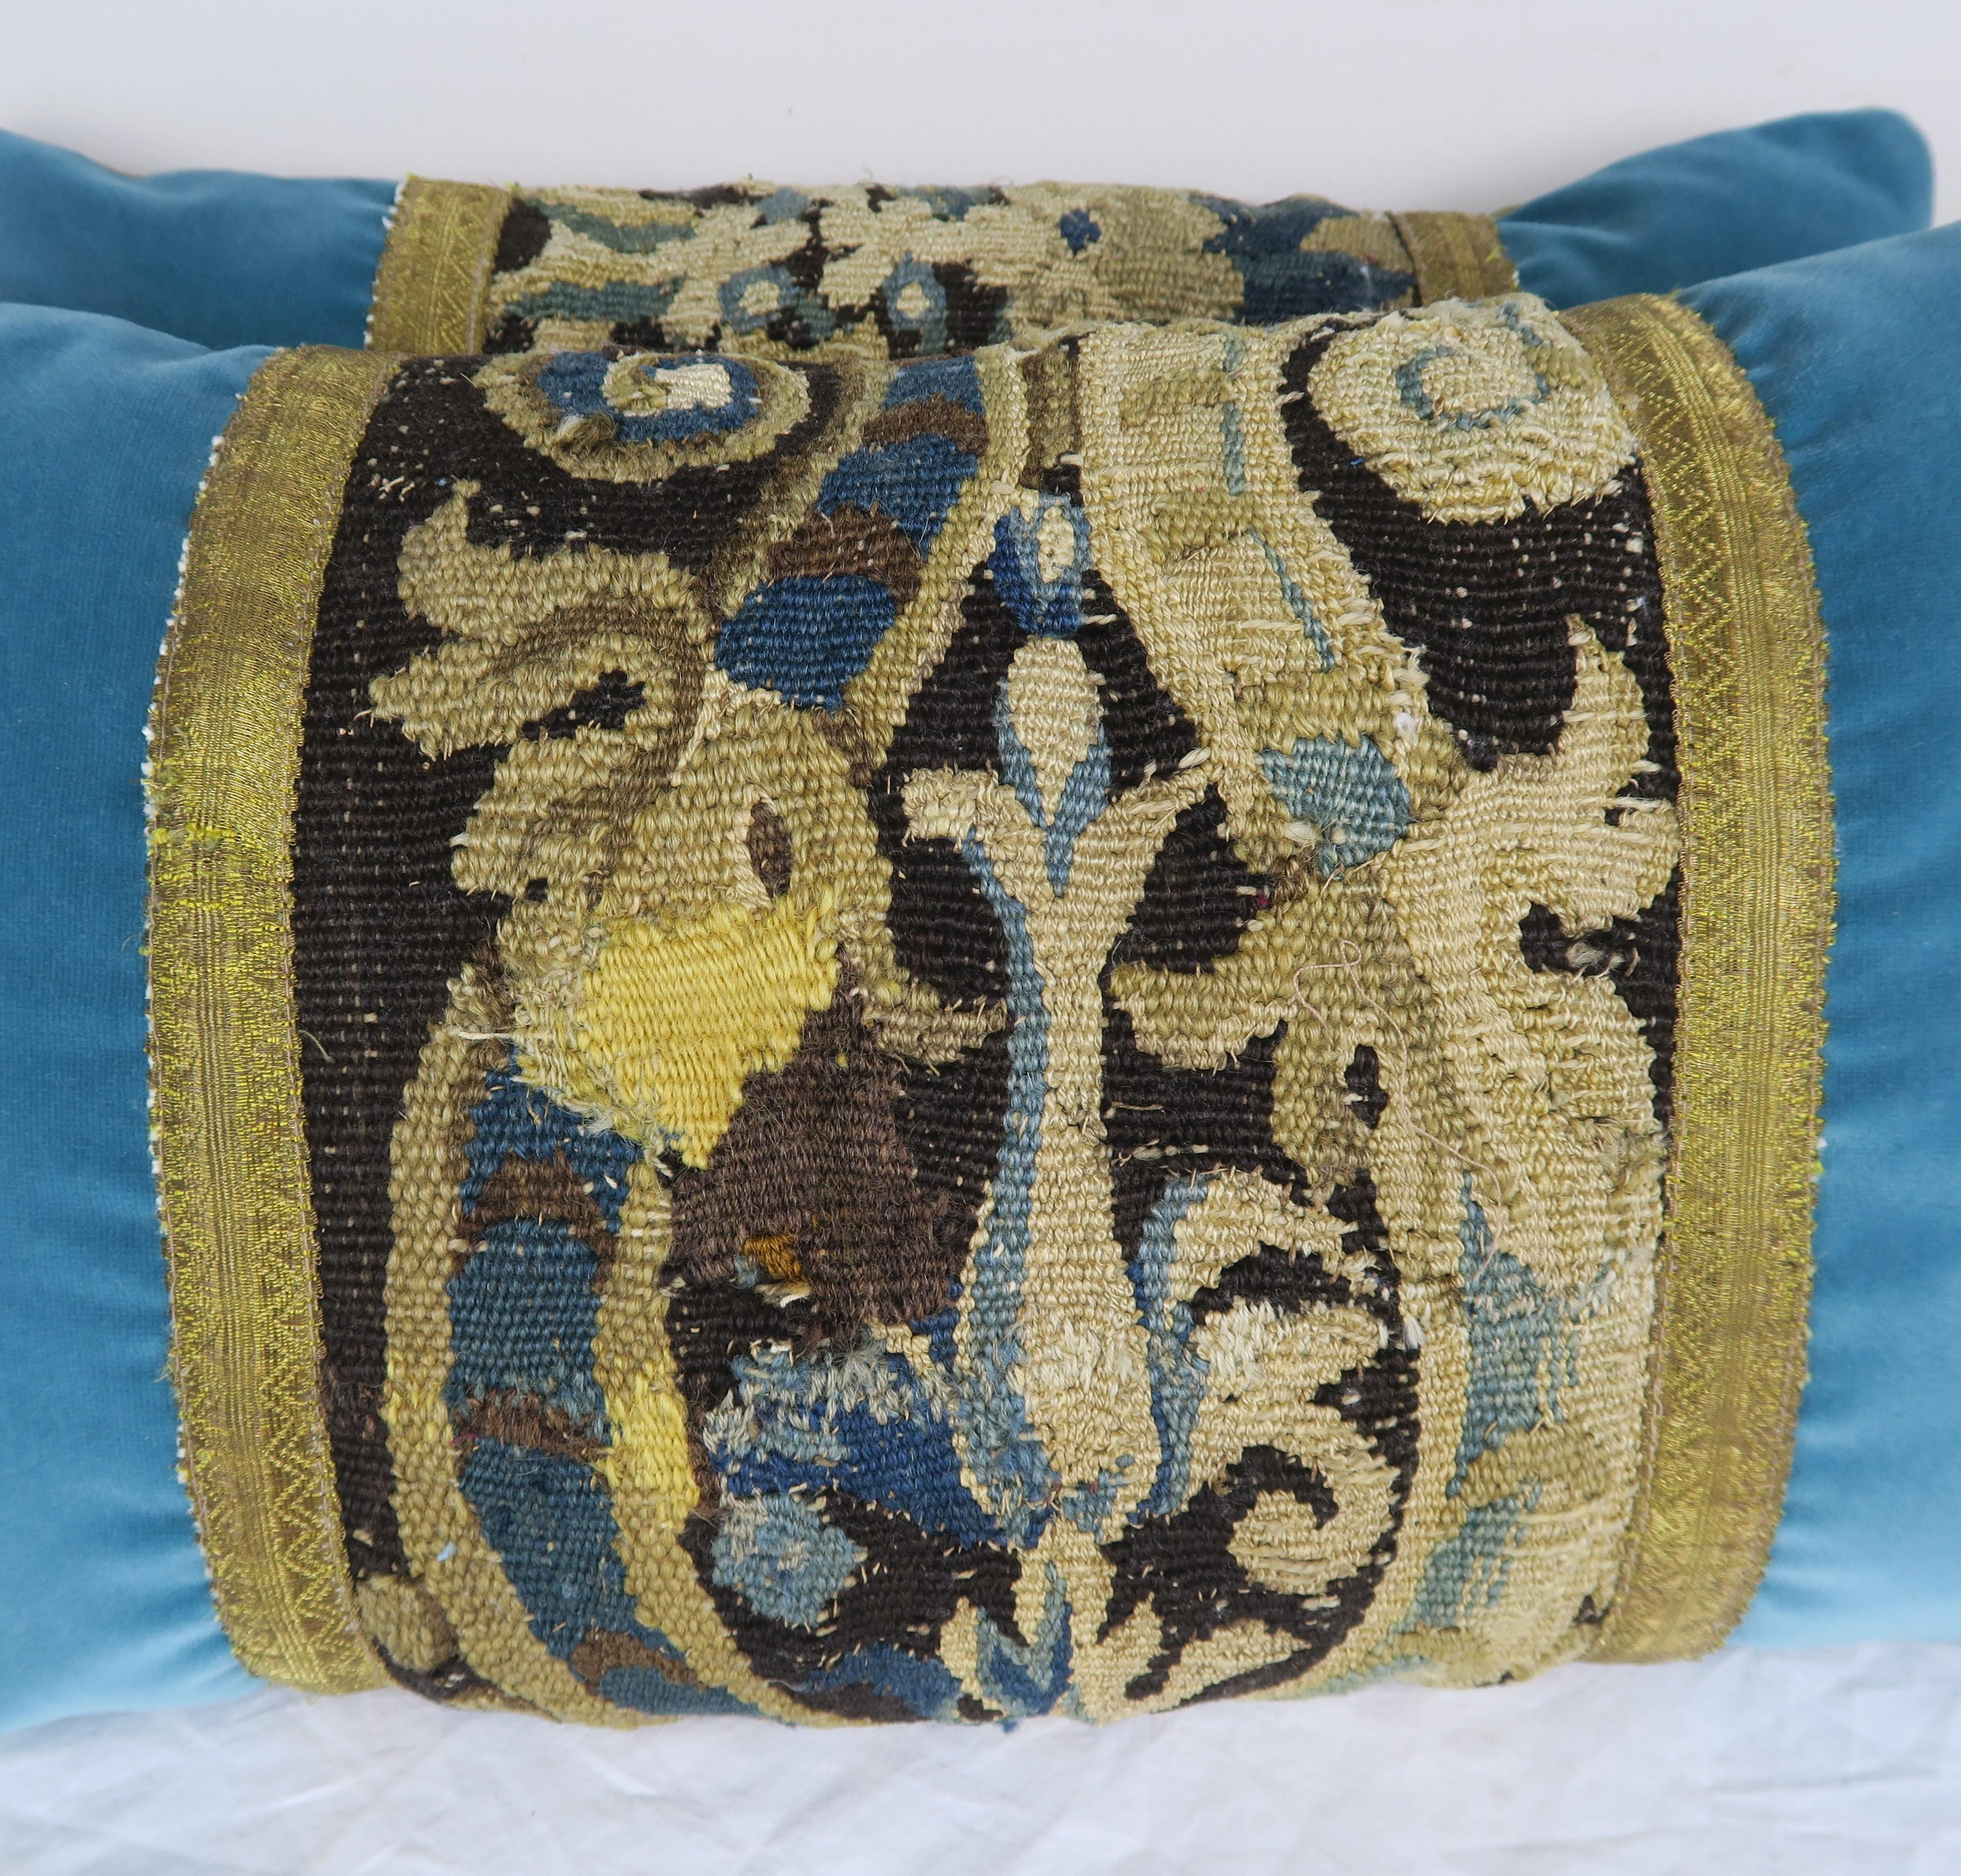 Pair of custom pillows designed with 18th century tapestry remnants in beautiful shades of blue, cream, gold on a chocolate brown background. The tapestry remnants are combined with 19th century. Metallic tape and contemporary blue cotton velvet and